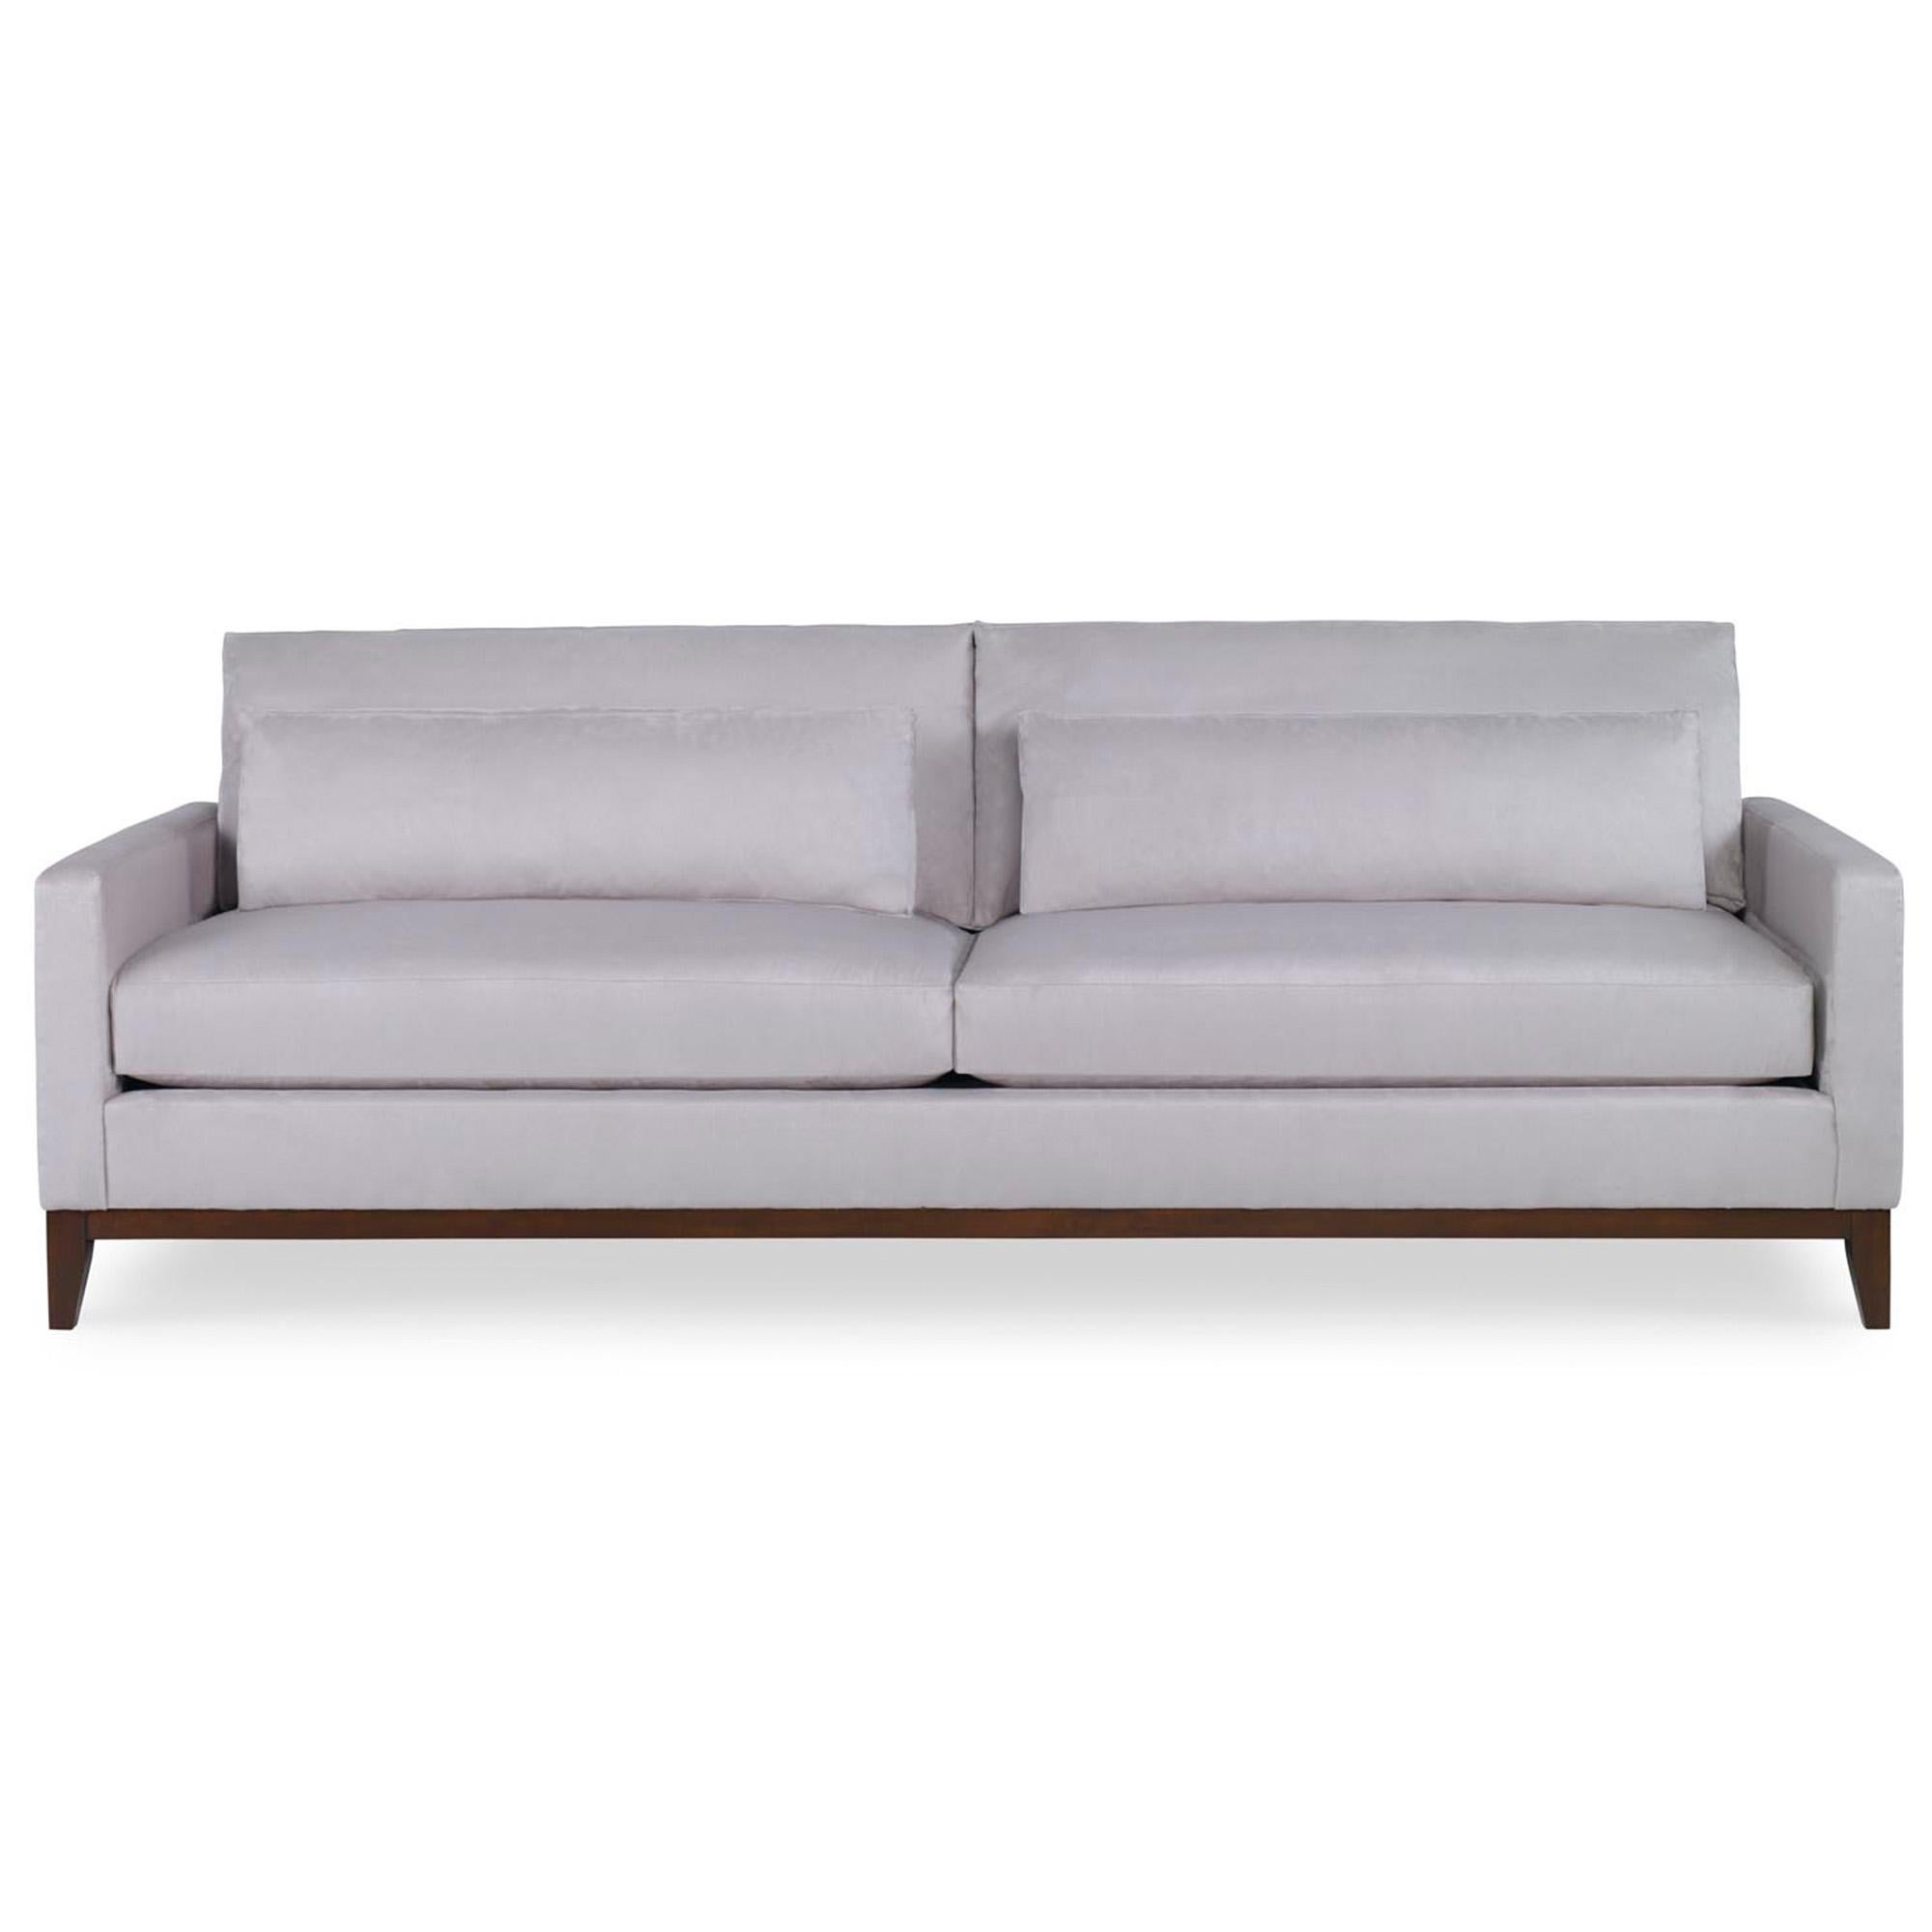 Lorane sofa (DS3301-1) in Kravet 23956.11 with hickory finish on the base and legs. Featuring two back cushions over two seat cushions, and two kidney pillows. Made in the USA.

Ready to ship.